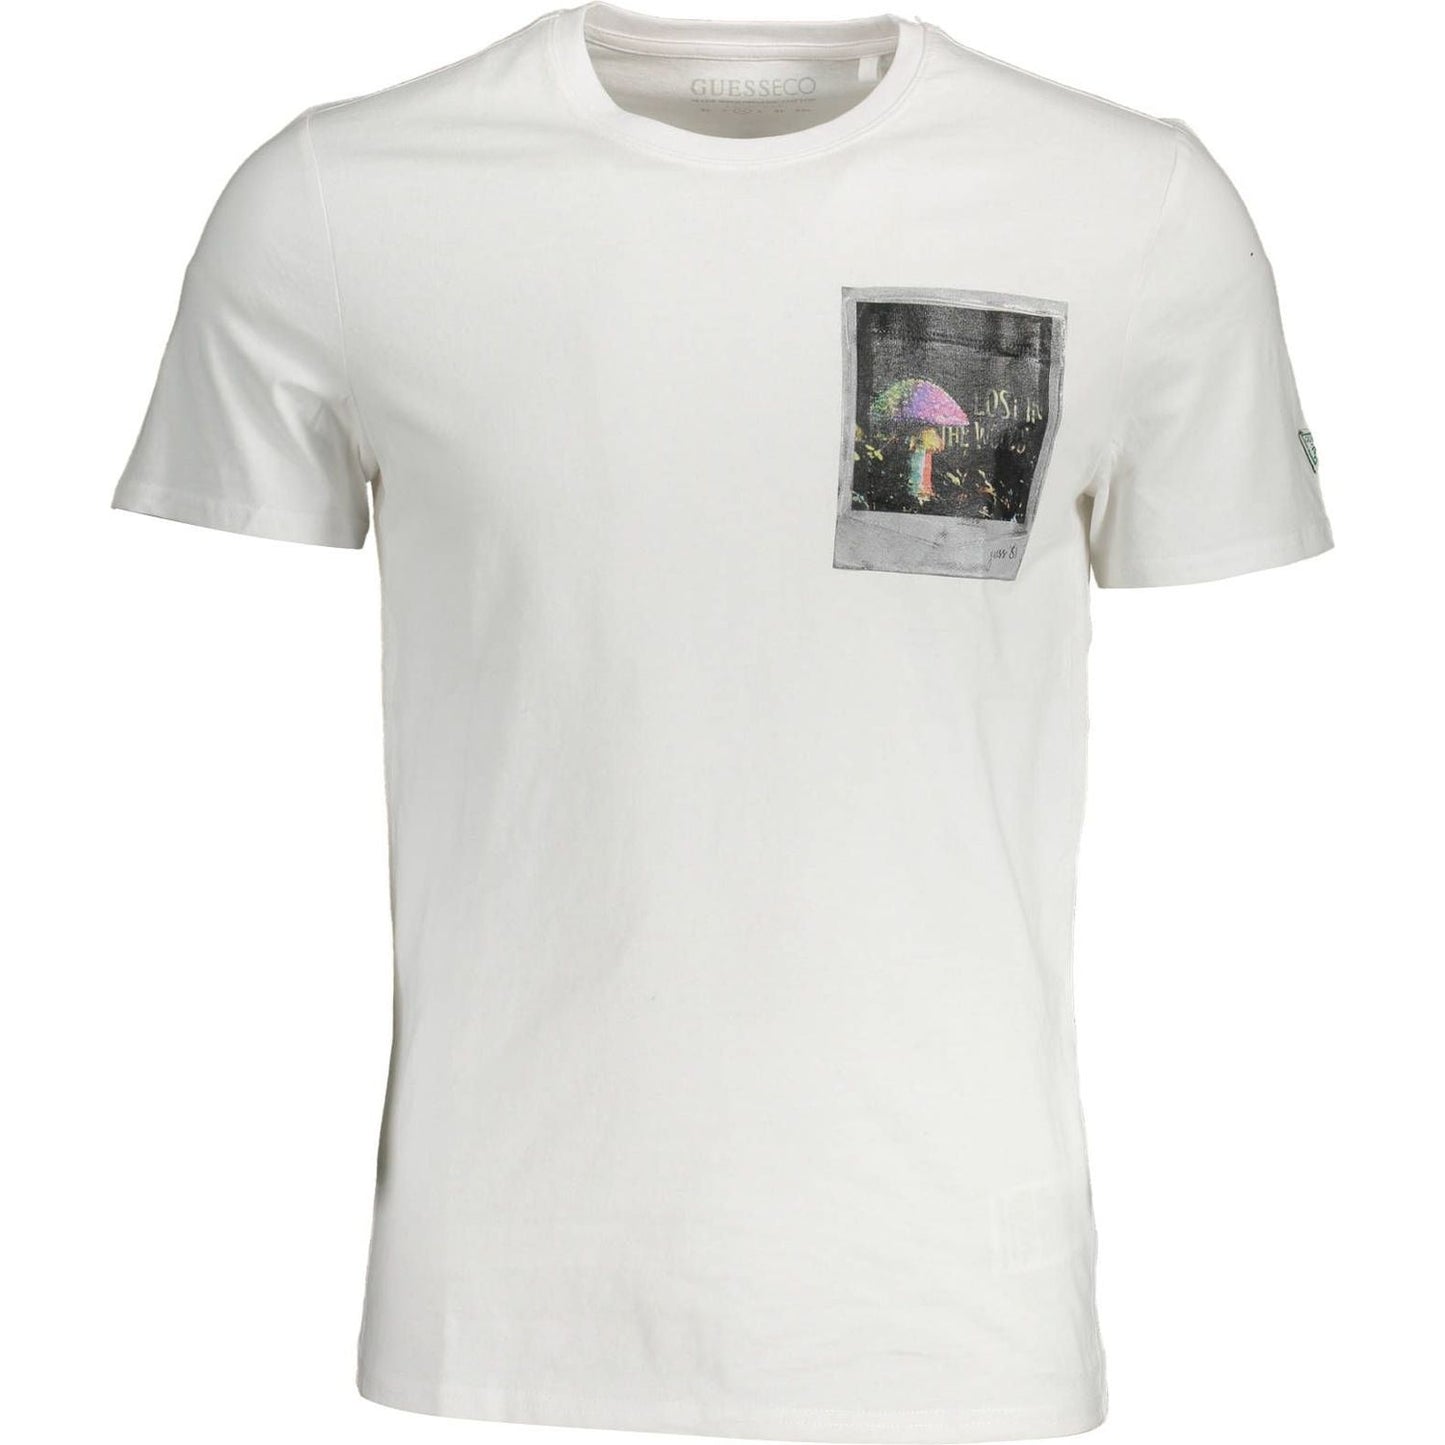 Guess Jeans Elegant Slim Fit White Tee with Print Detail elegant-slim-fit-white-tee-with-print-detail